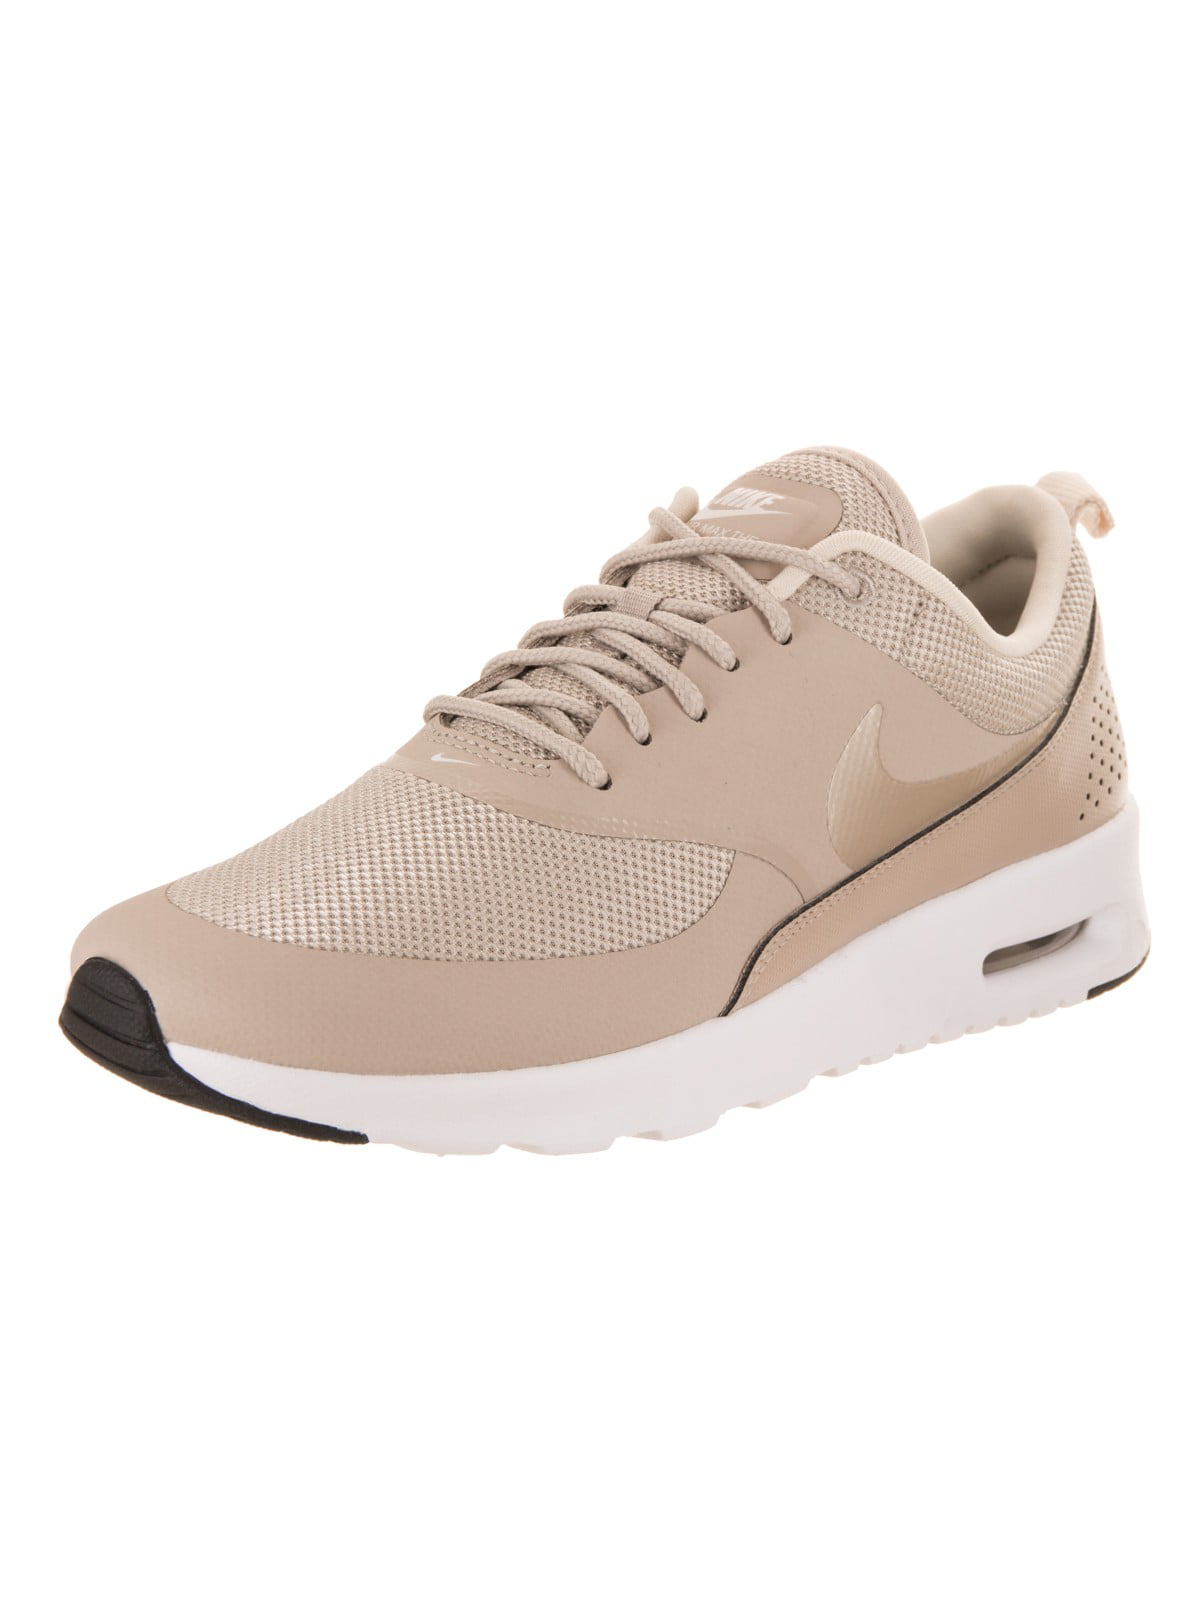 nike air max thea running shoes pink